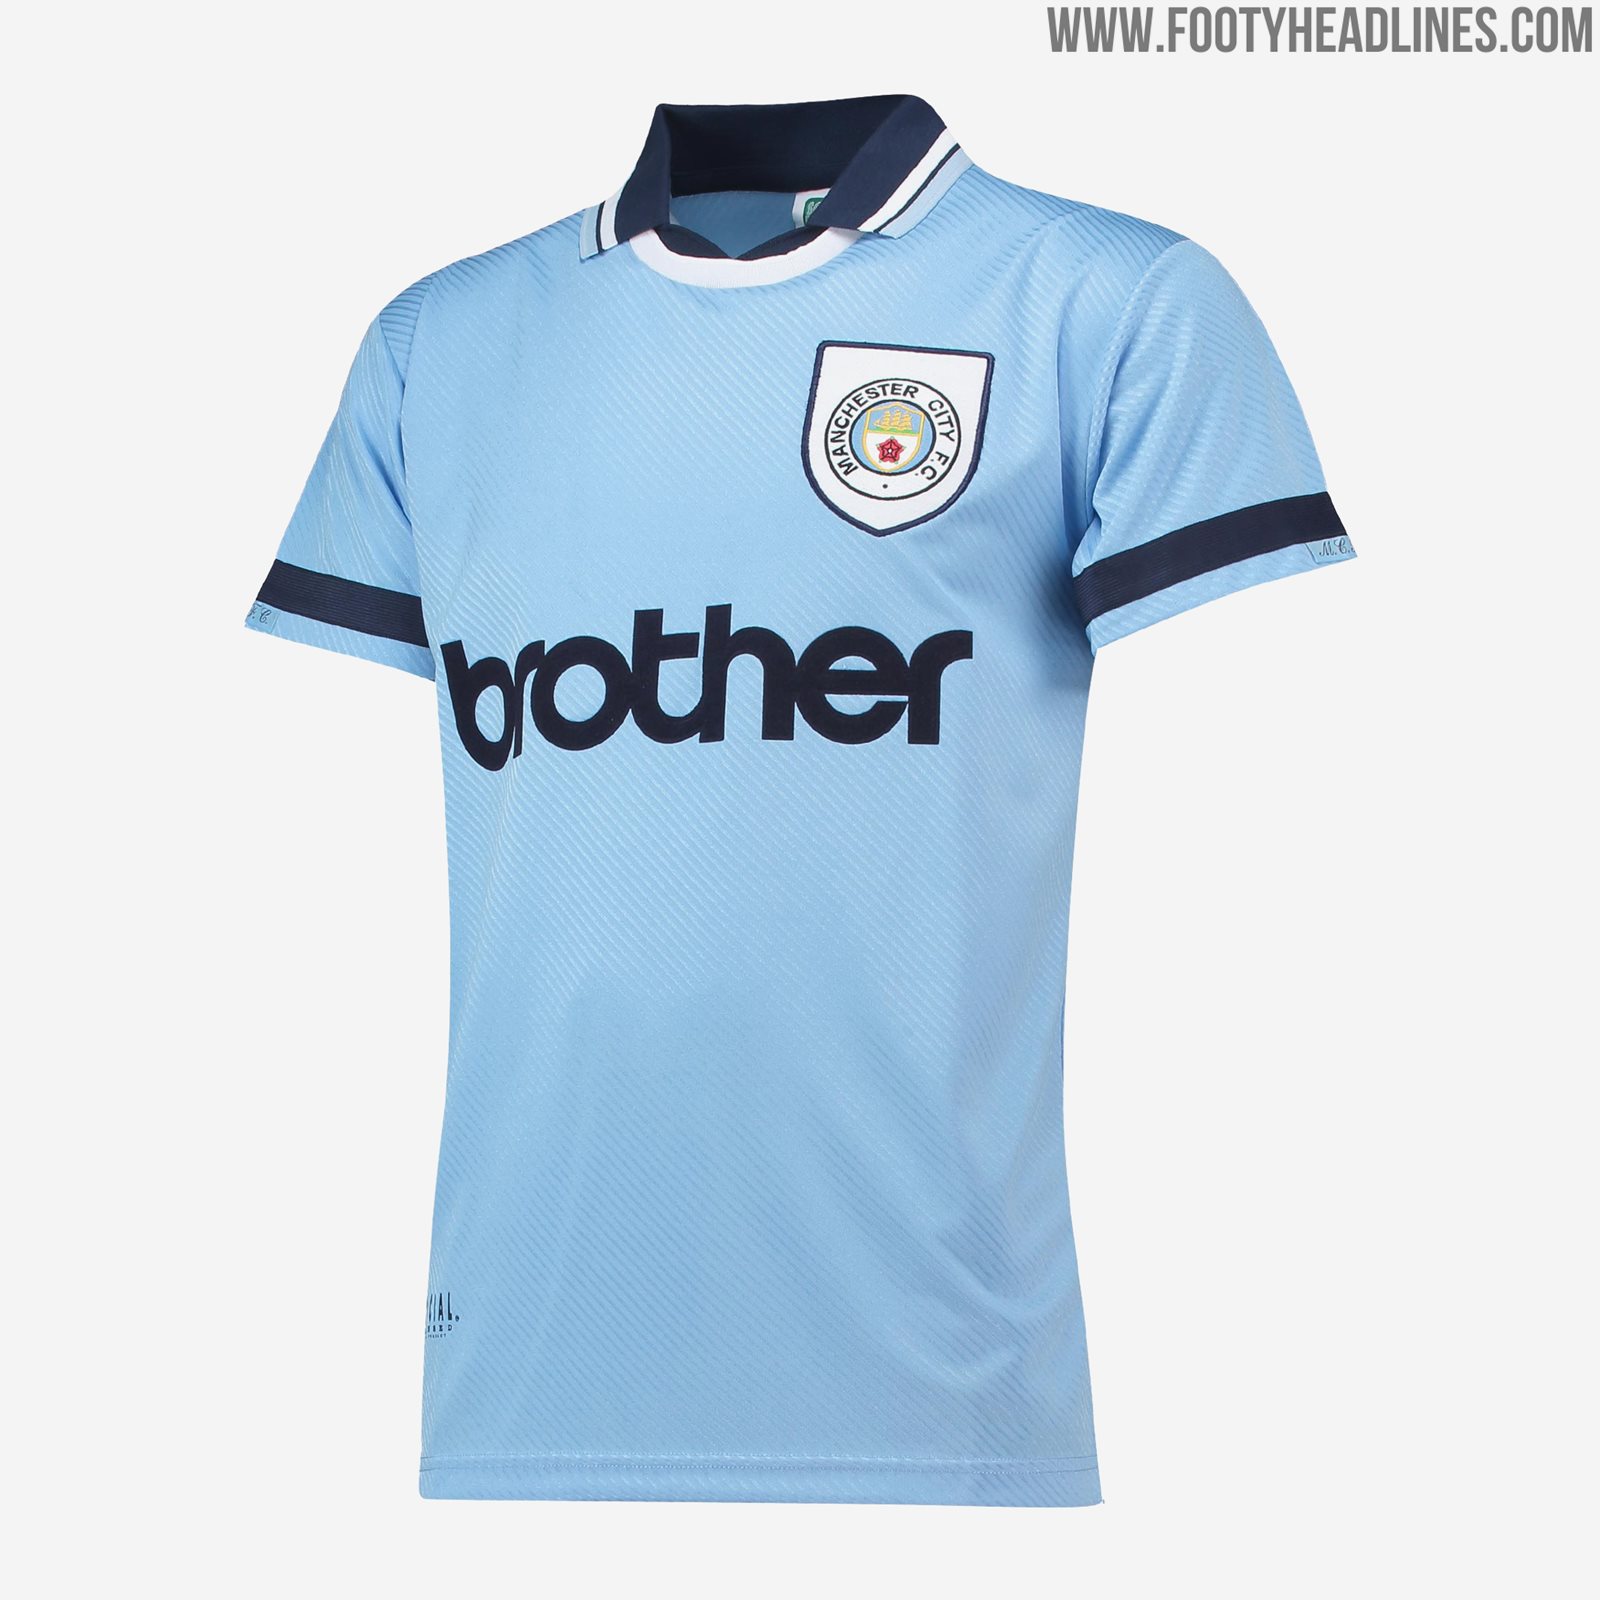 Class - 11 Manchester City Retro Kits Launched - Closer Look - Footy Headlines1600 x 1600